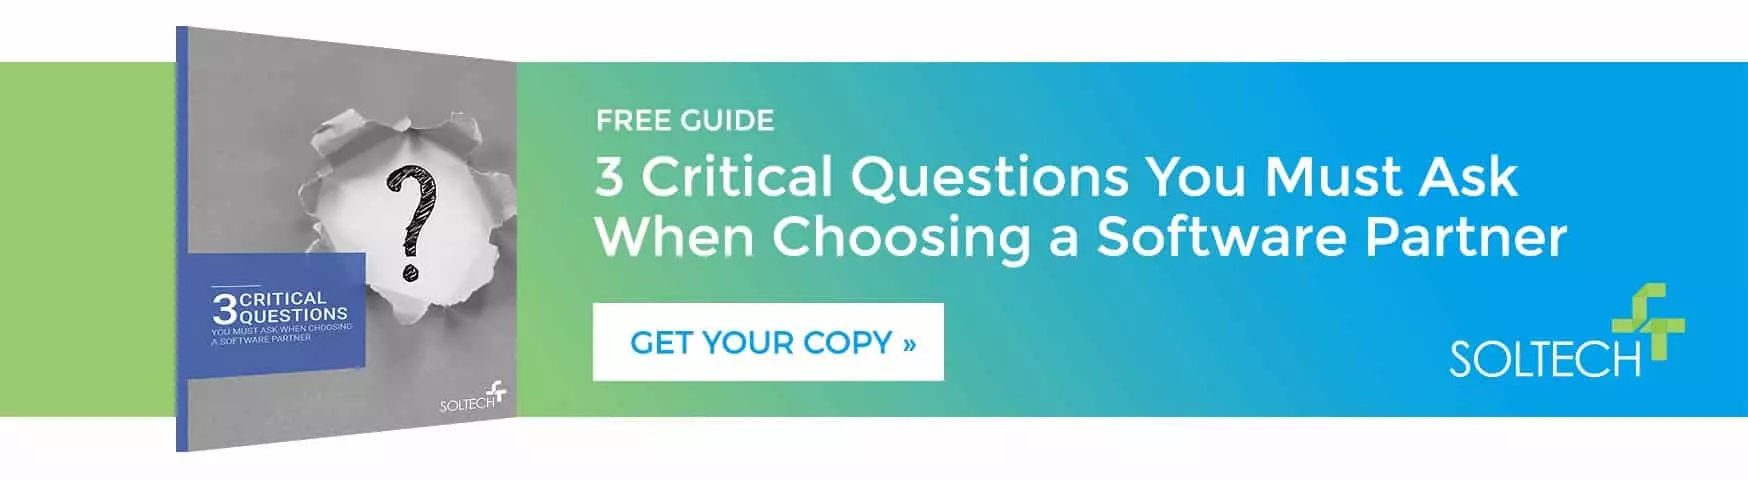 3 Critical questions you must ask when choosing a software partner